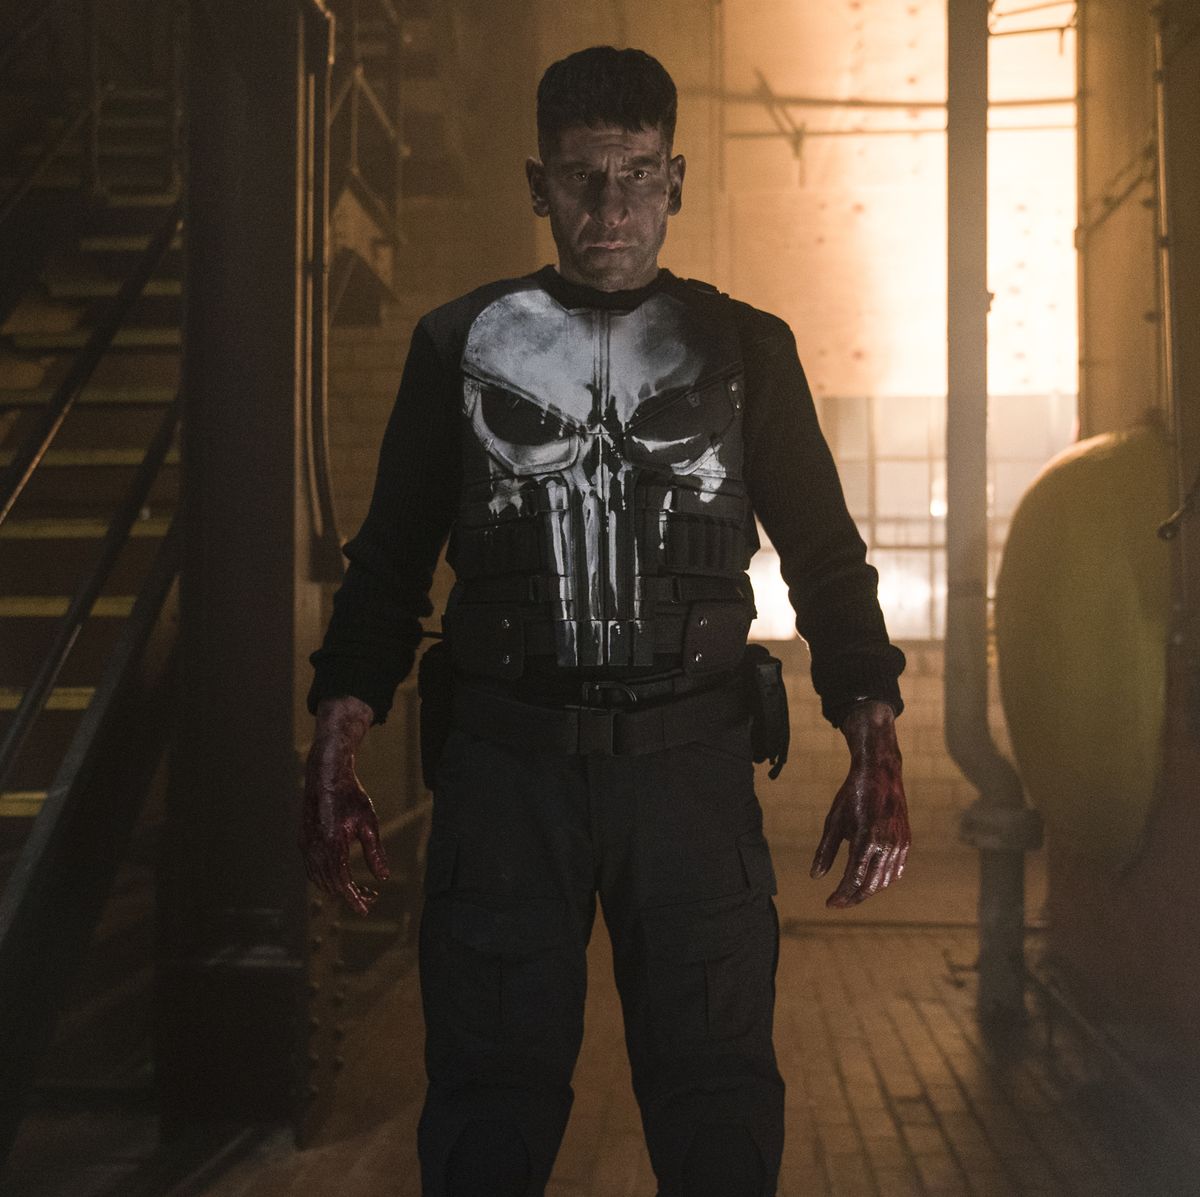 PSA: If you need more Frank Castle in you life, Punisher (2005) is